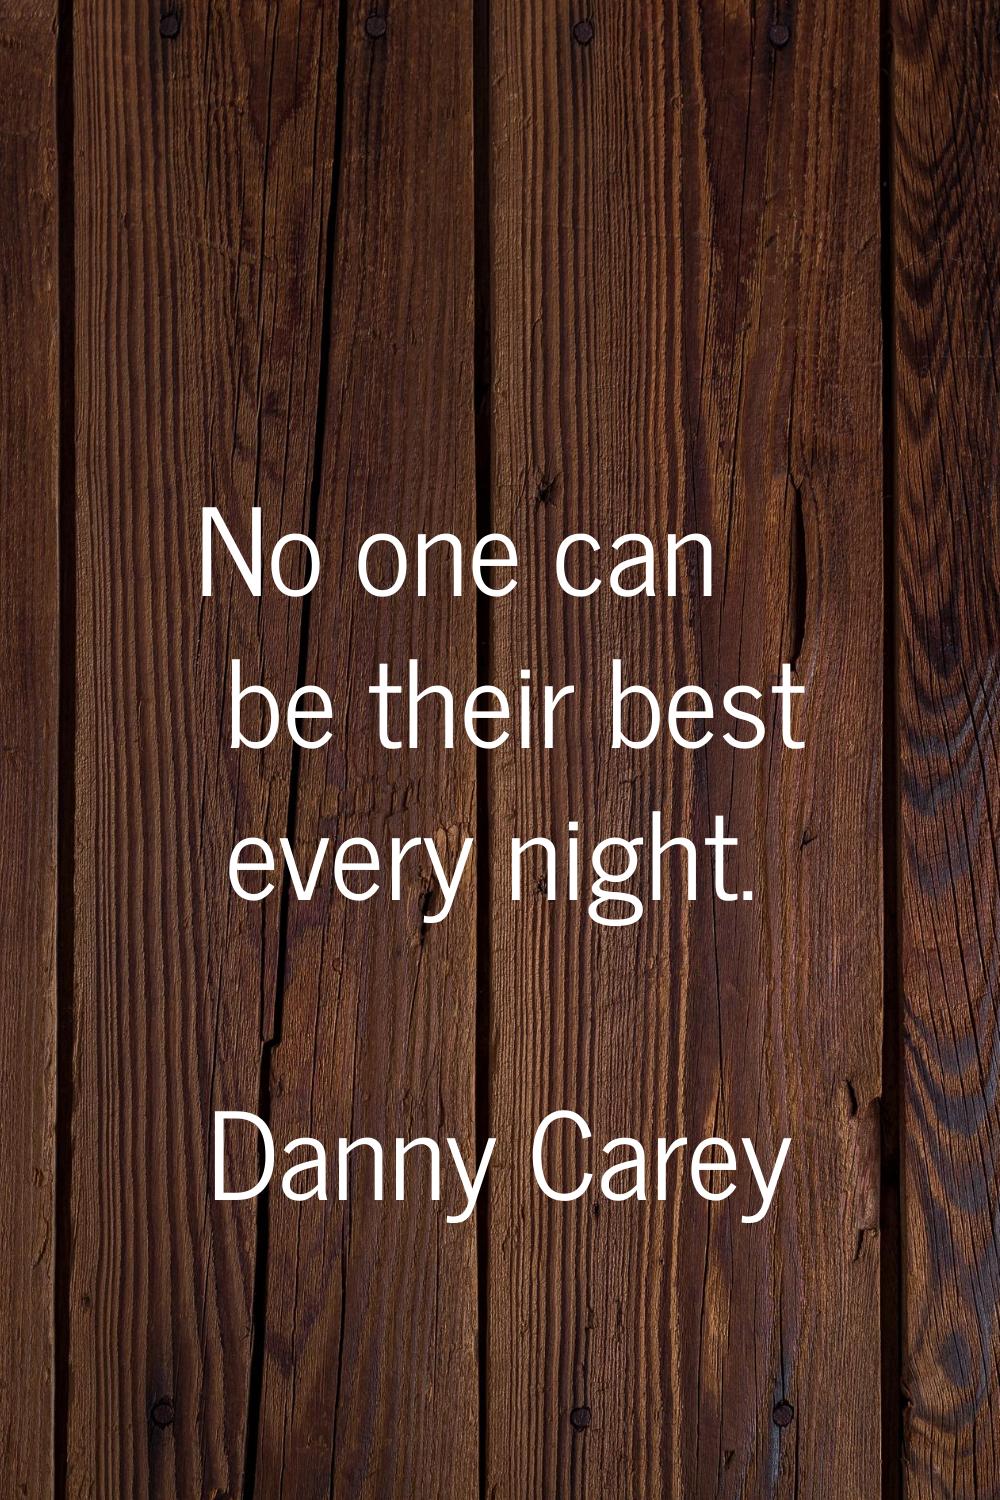 No one can be their best every night.